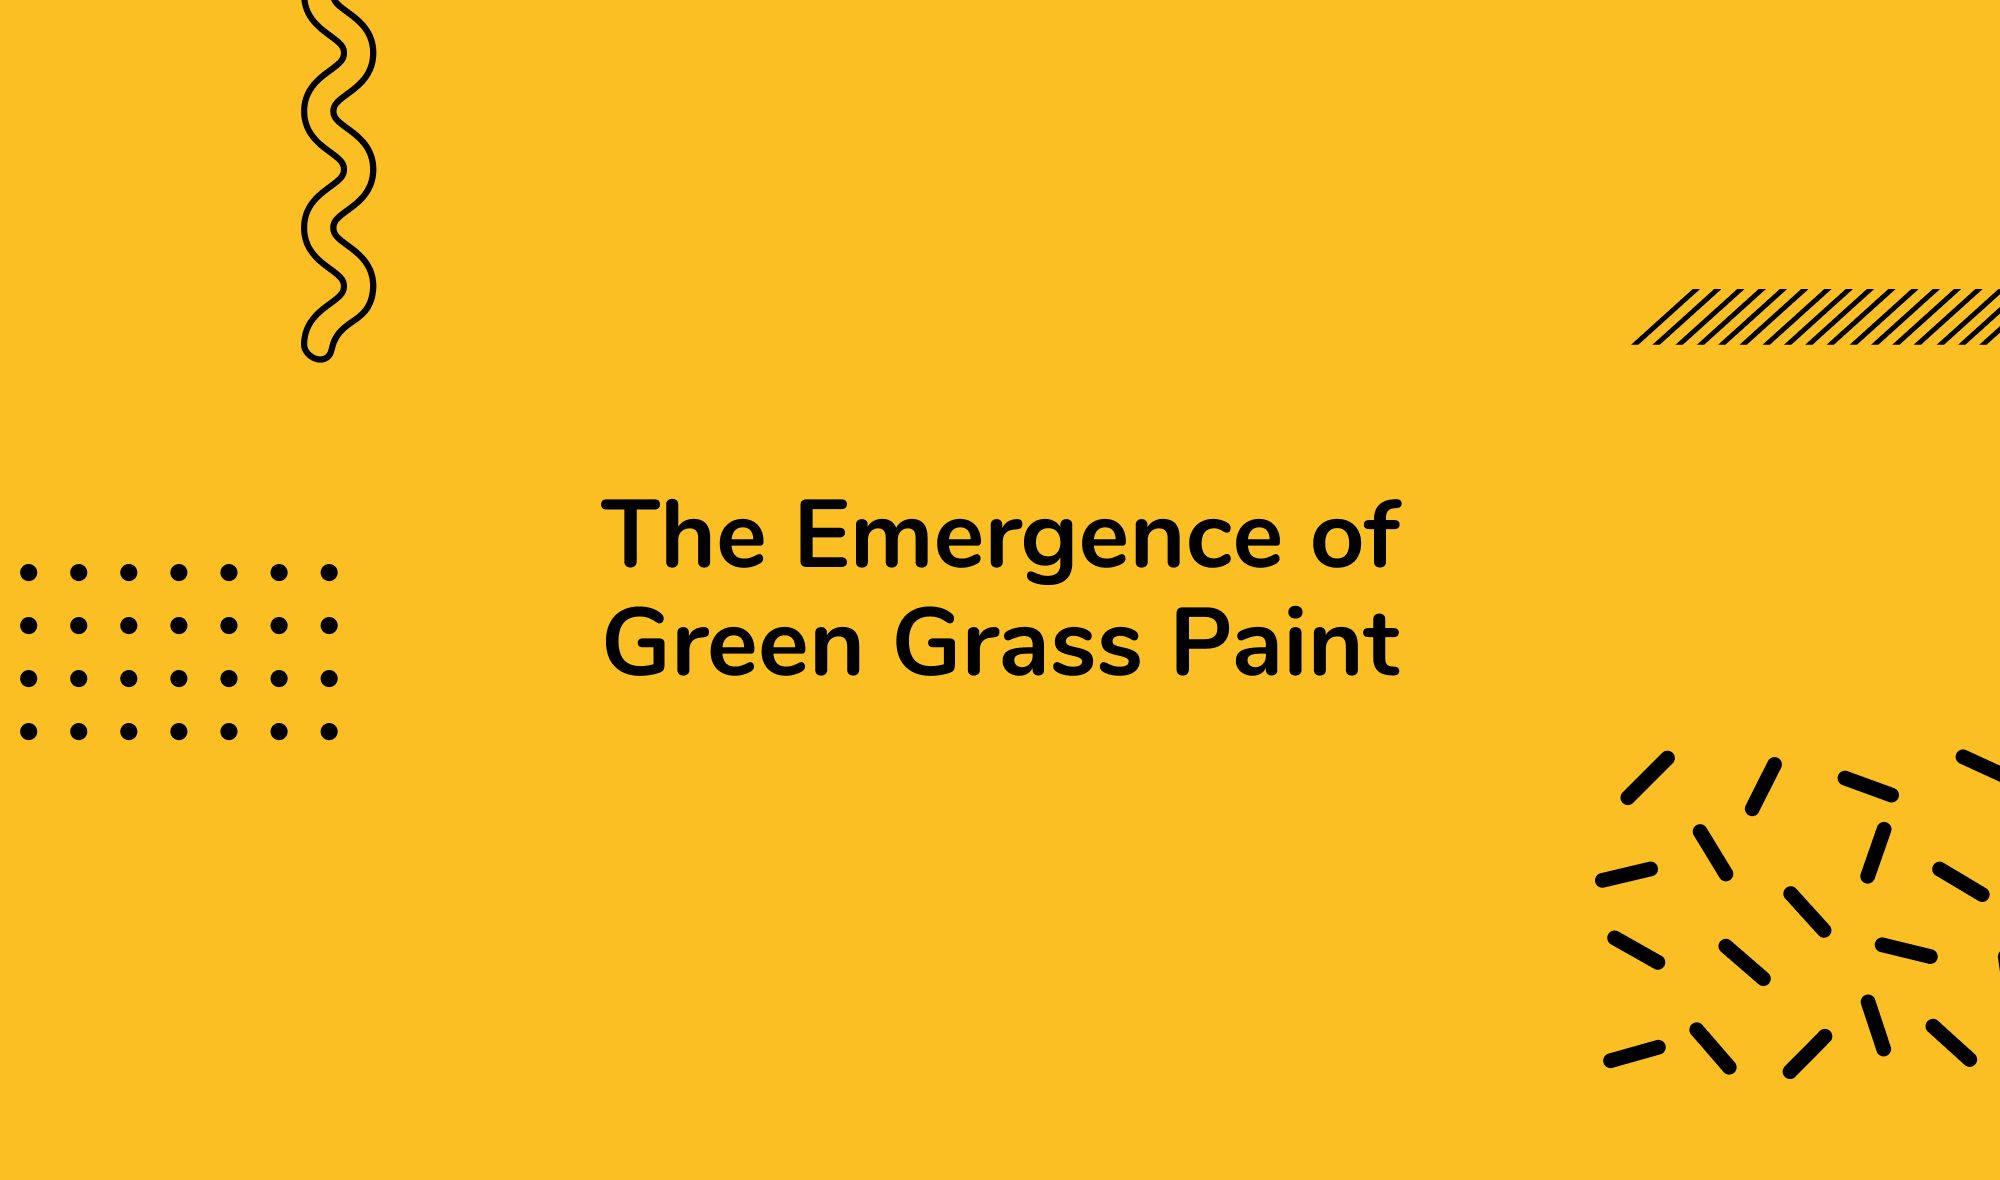 The Emergence of Green Grass Paint